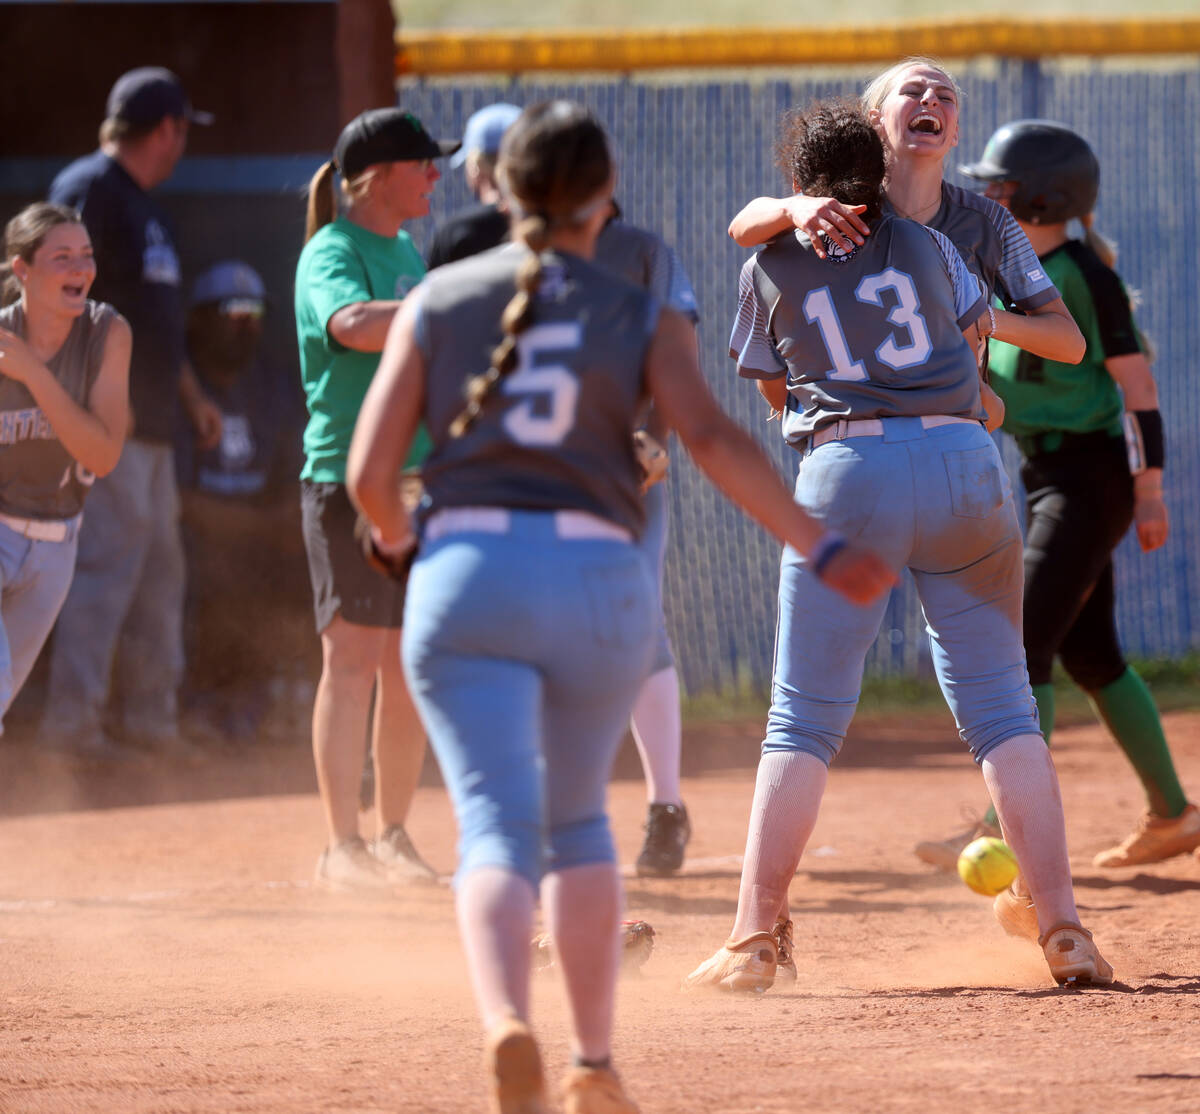 Centennial players, including pitcher Teagan Clemmons, right, celebrate beating Palo Verde 11-7 ...